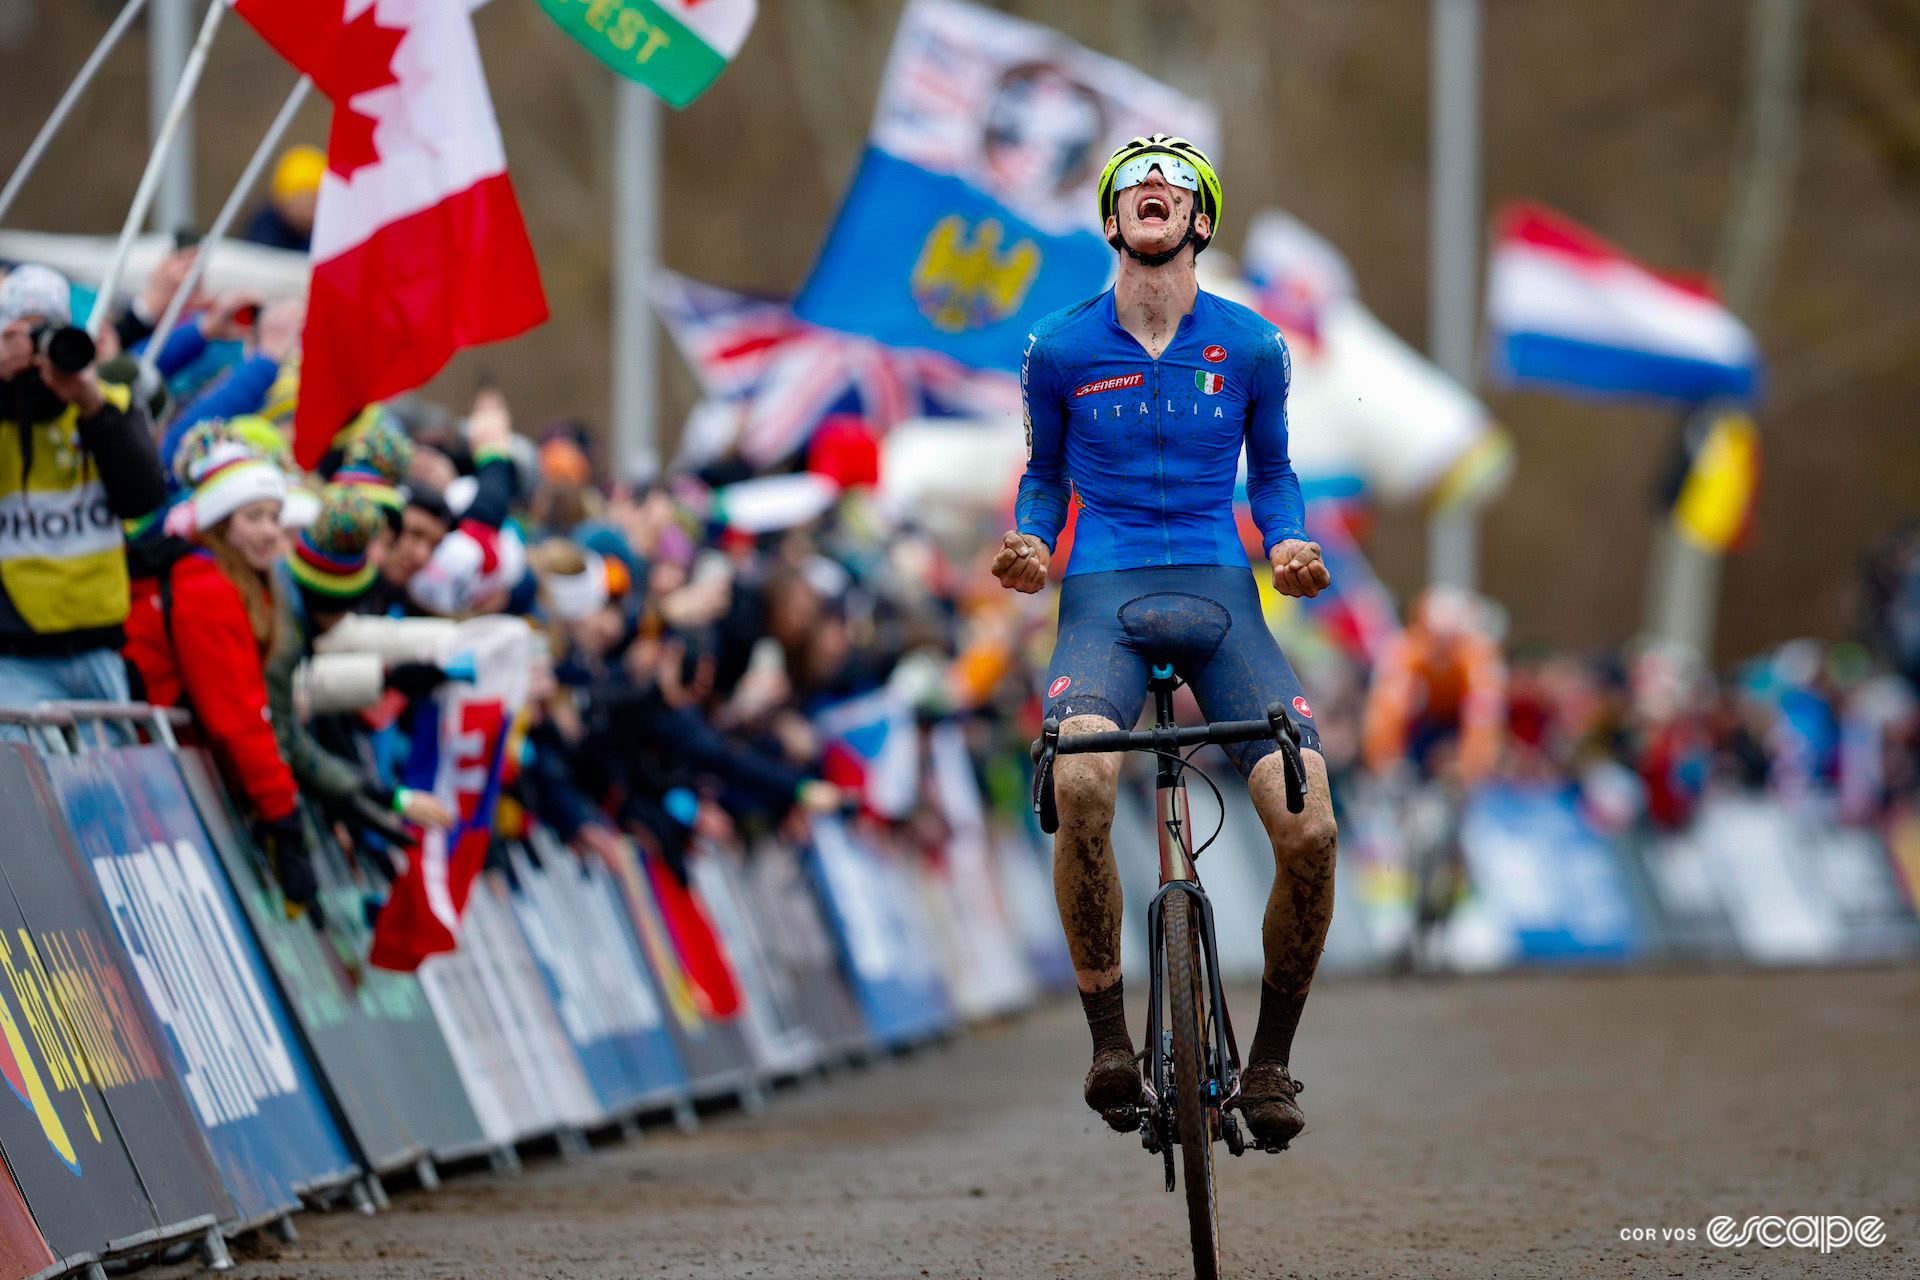 Italian Stefano Viezzi roars in celebration as he wins the junior men's title at the 2024 Cyclocross World Championships in Tábor.